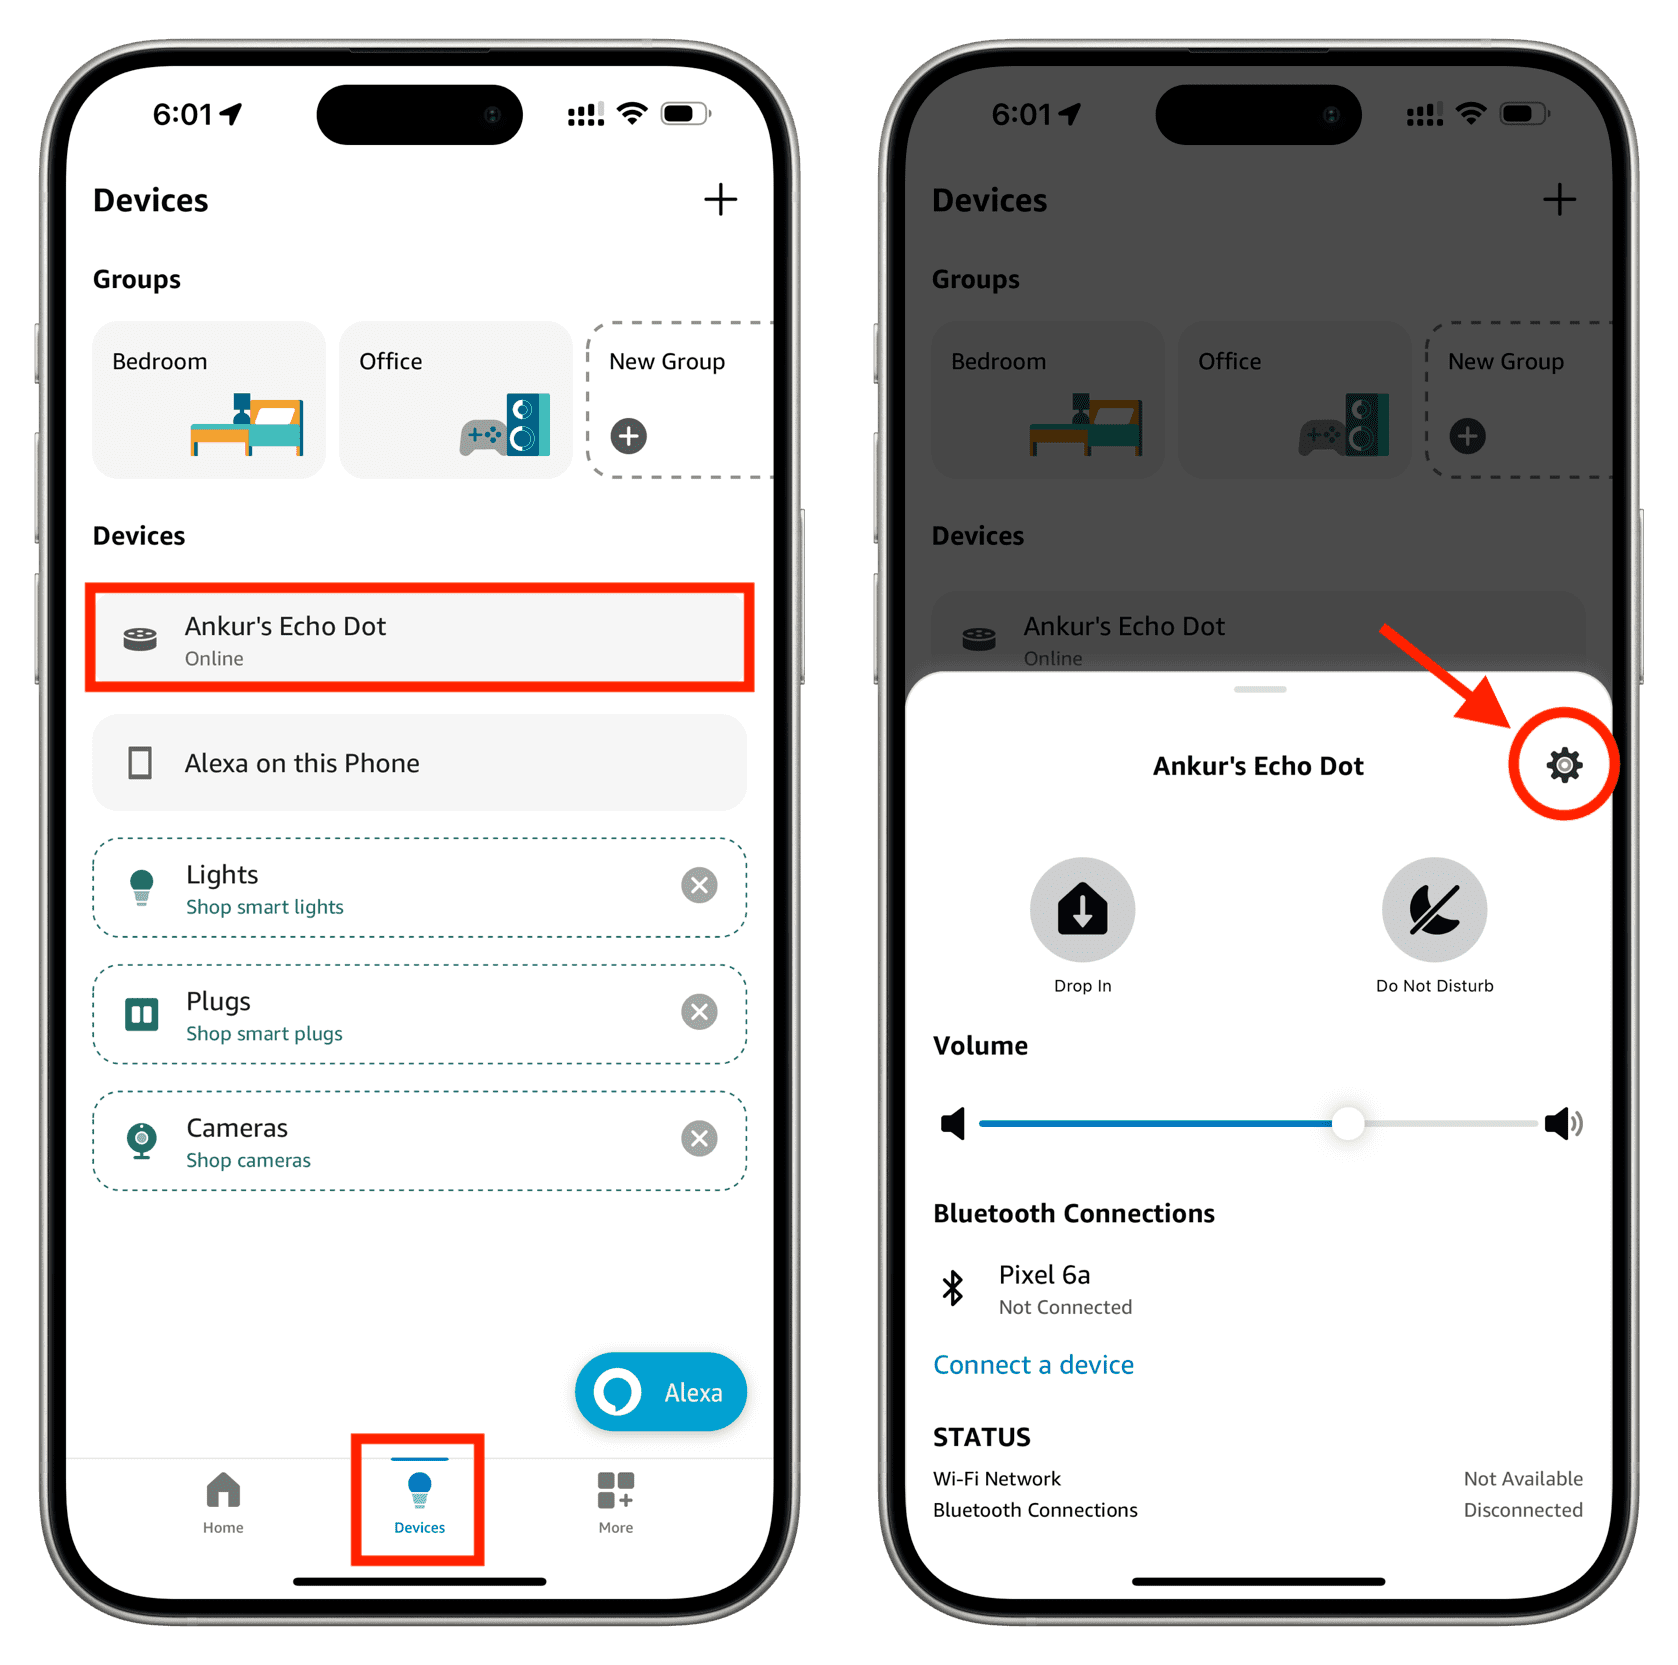 Select Amazon Echo device and tap settings icon